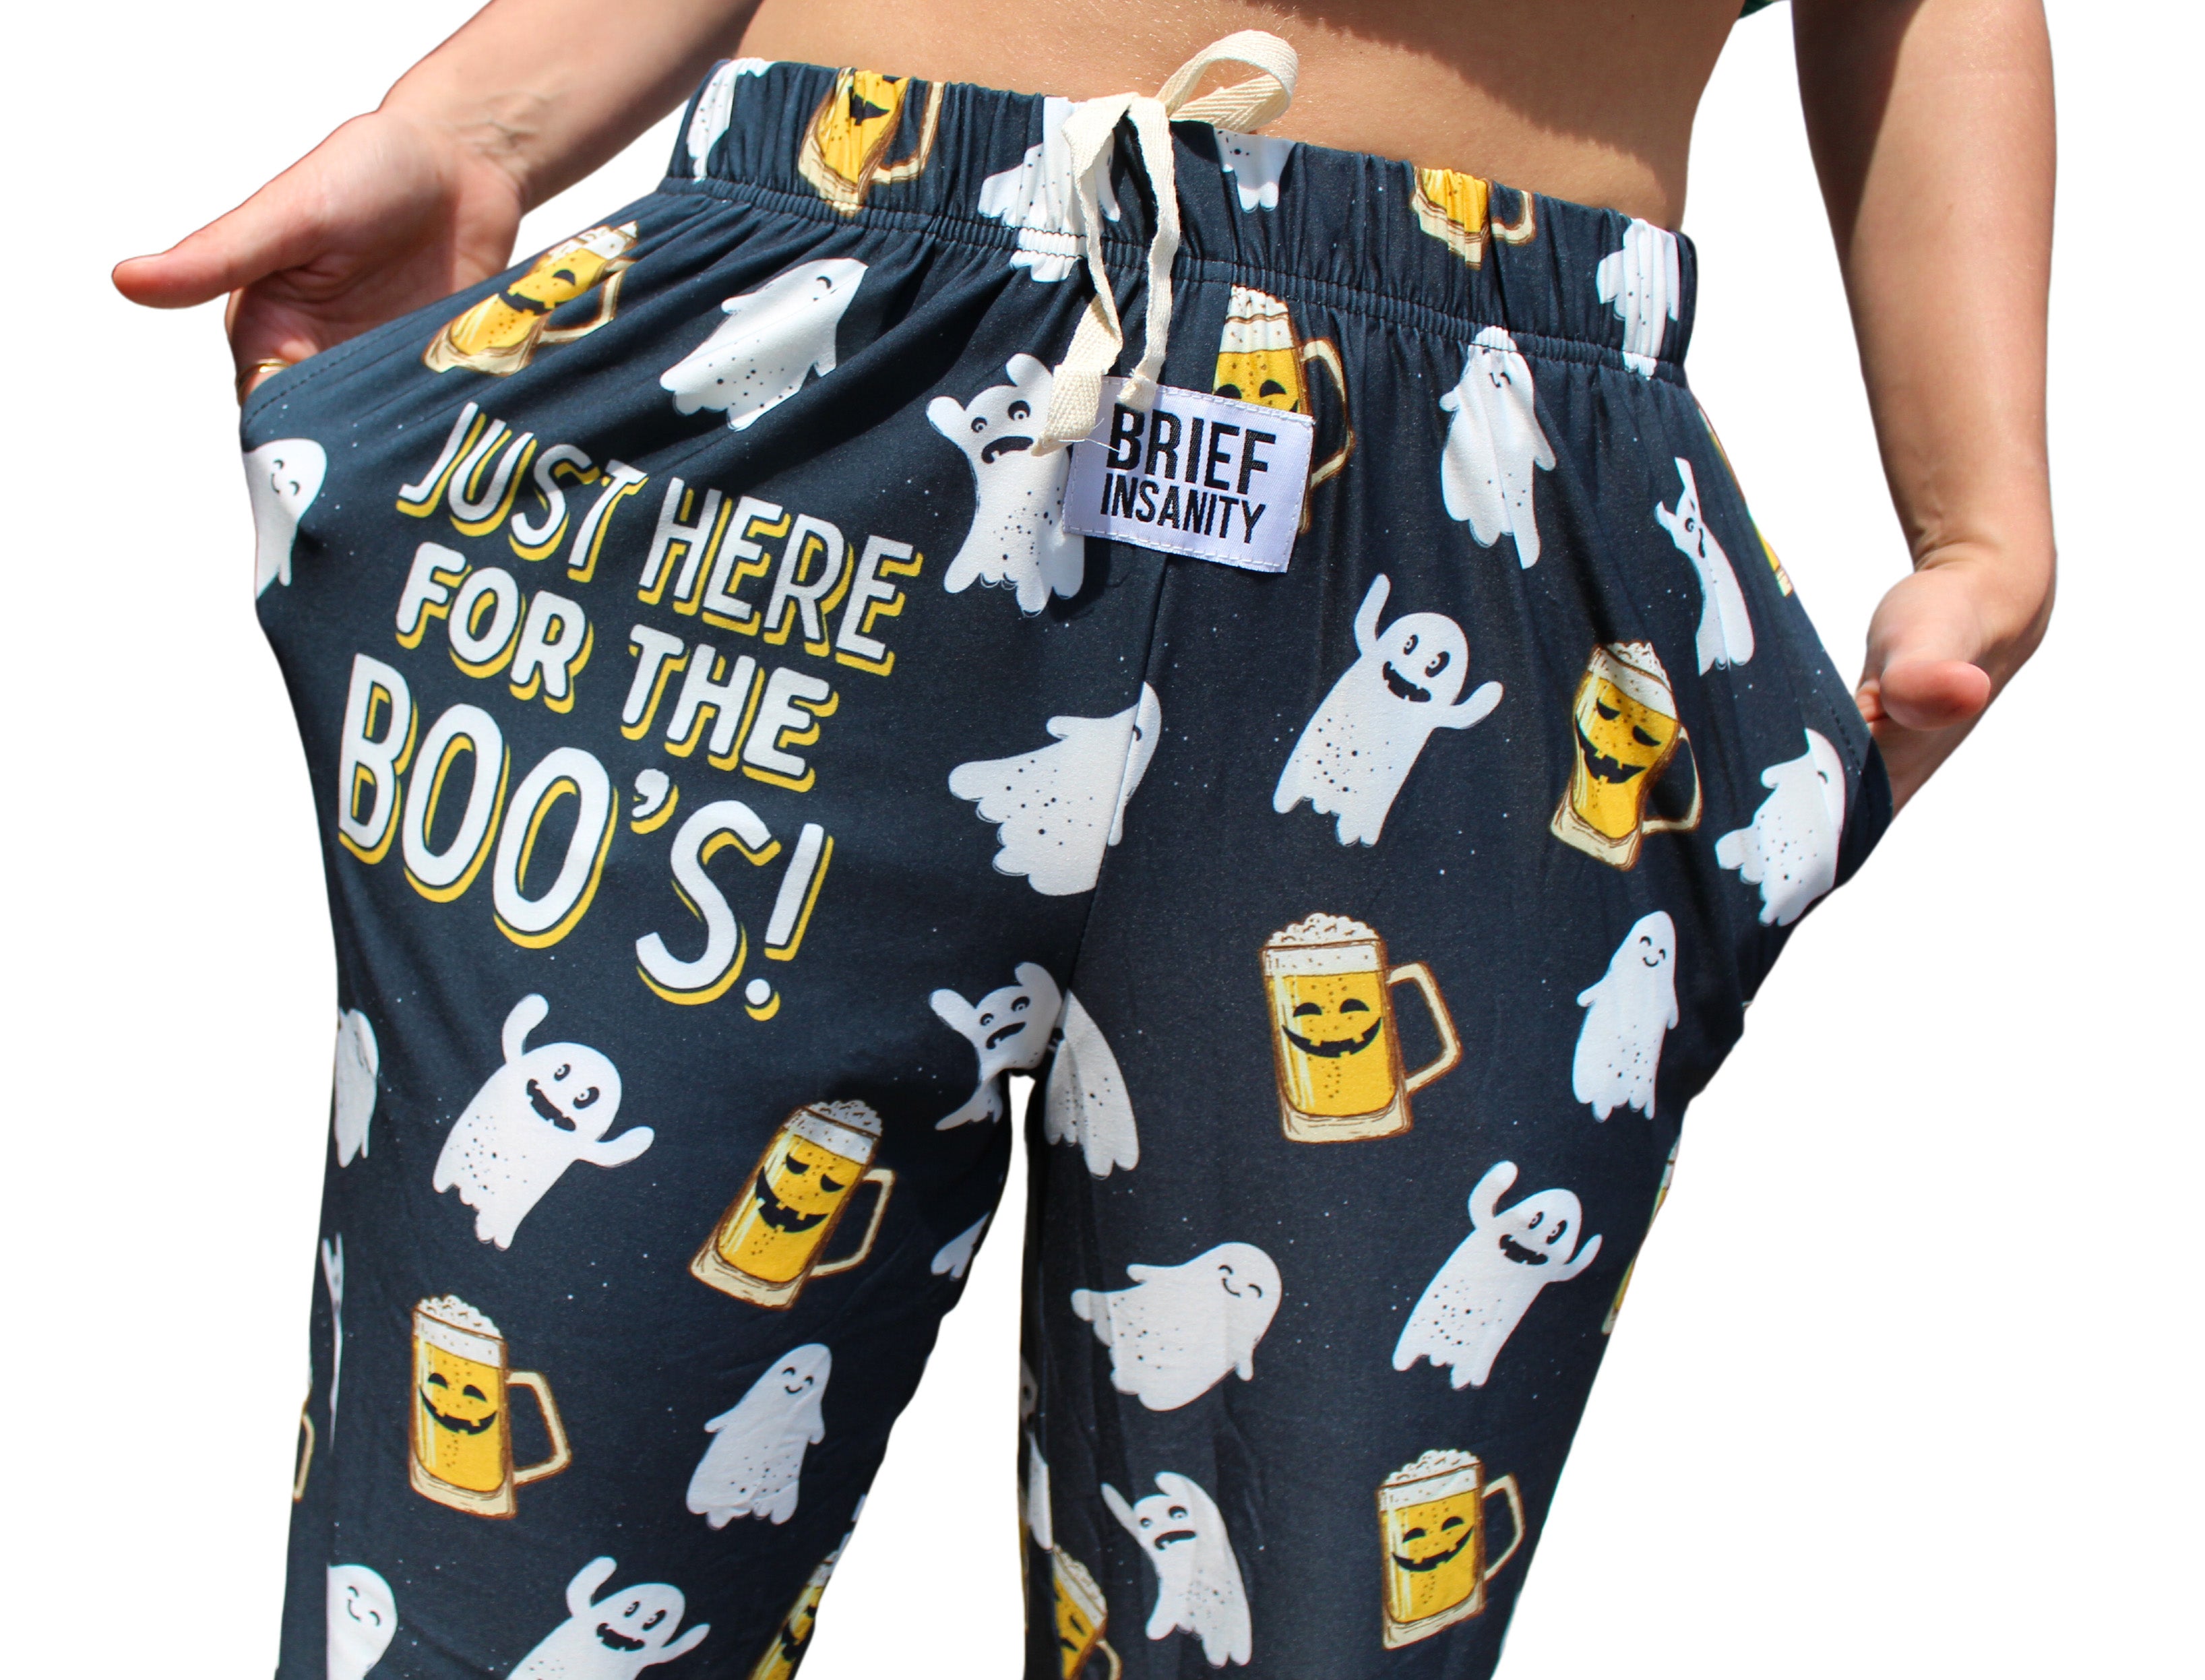 Just Here For the Boo's! Pajama Lounge Pants close up front view on model (waist down)